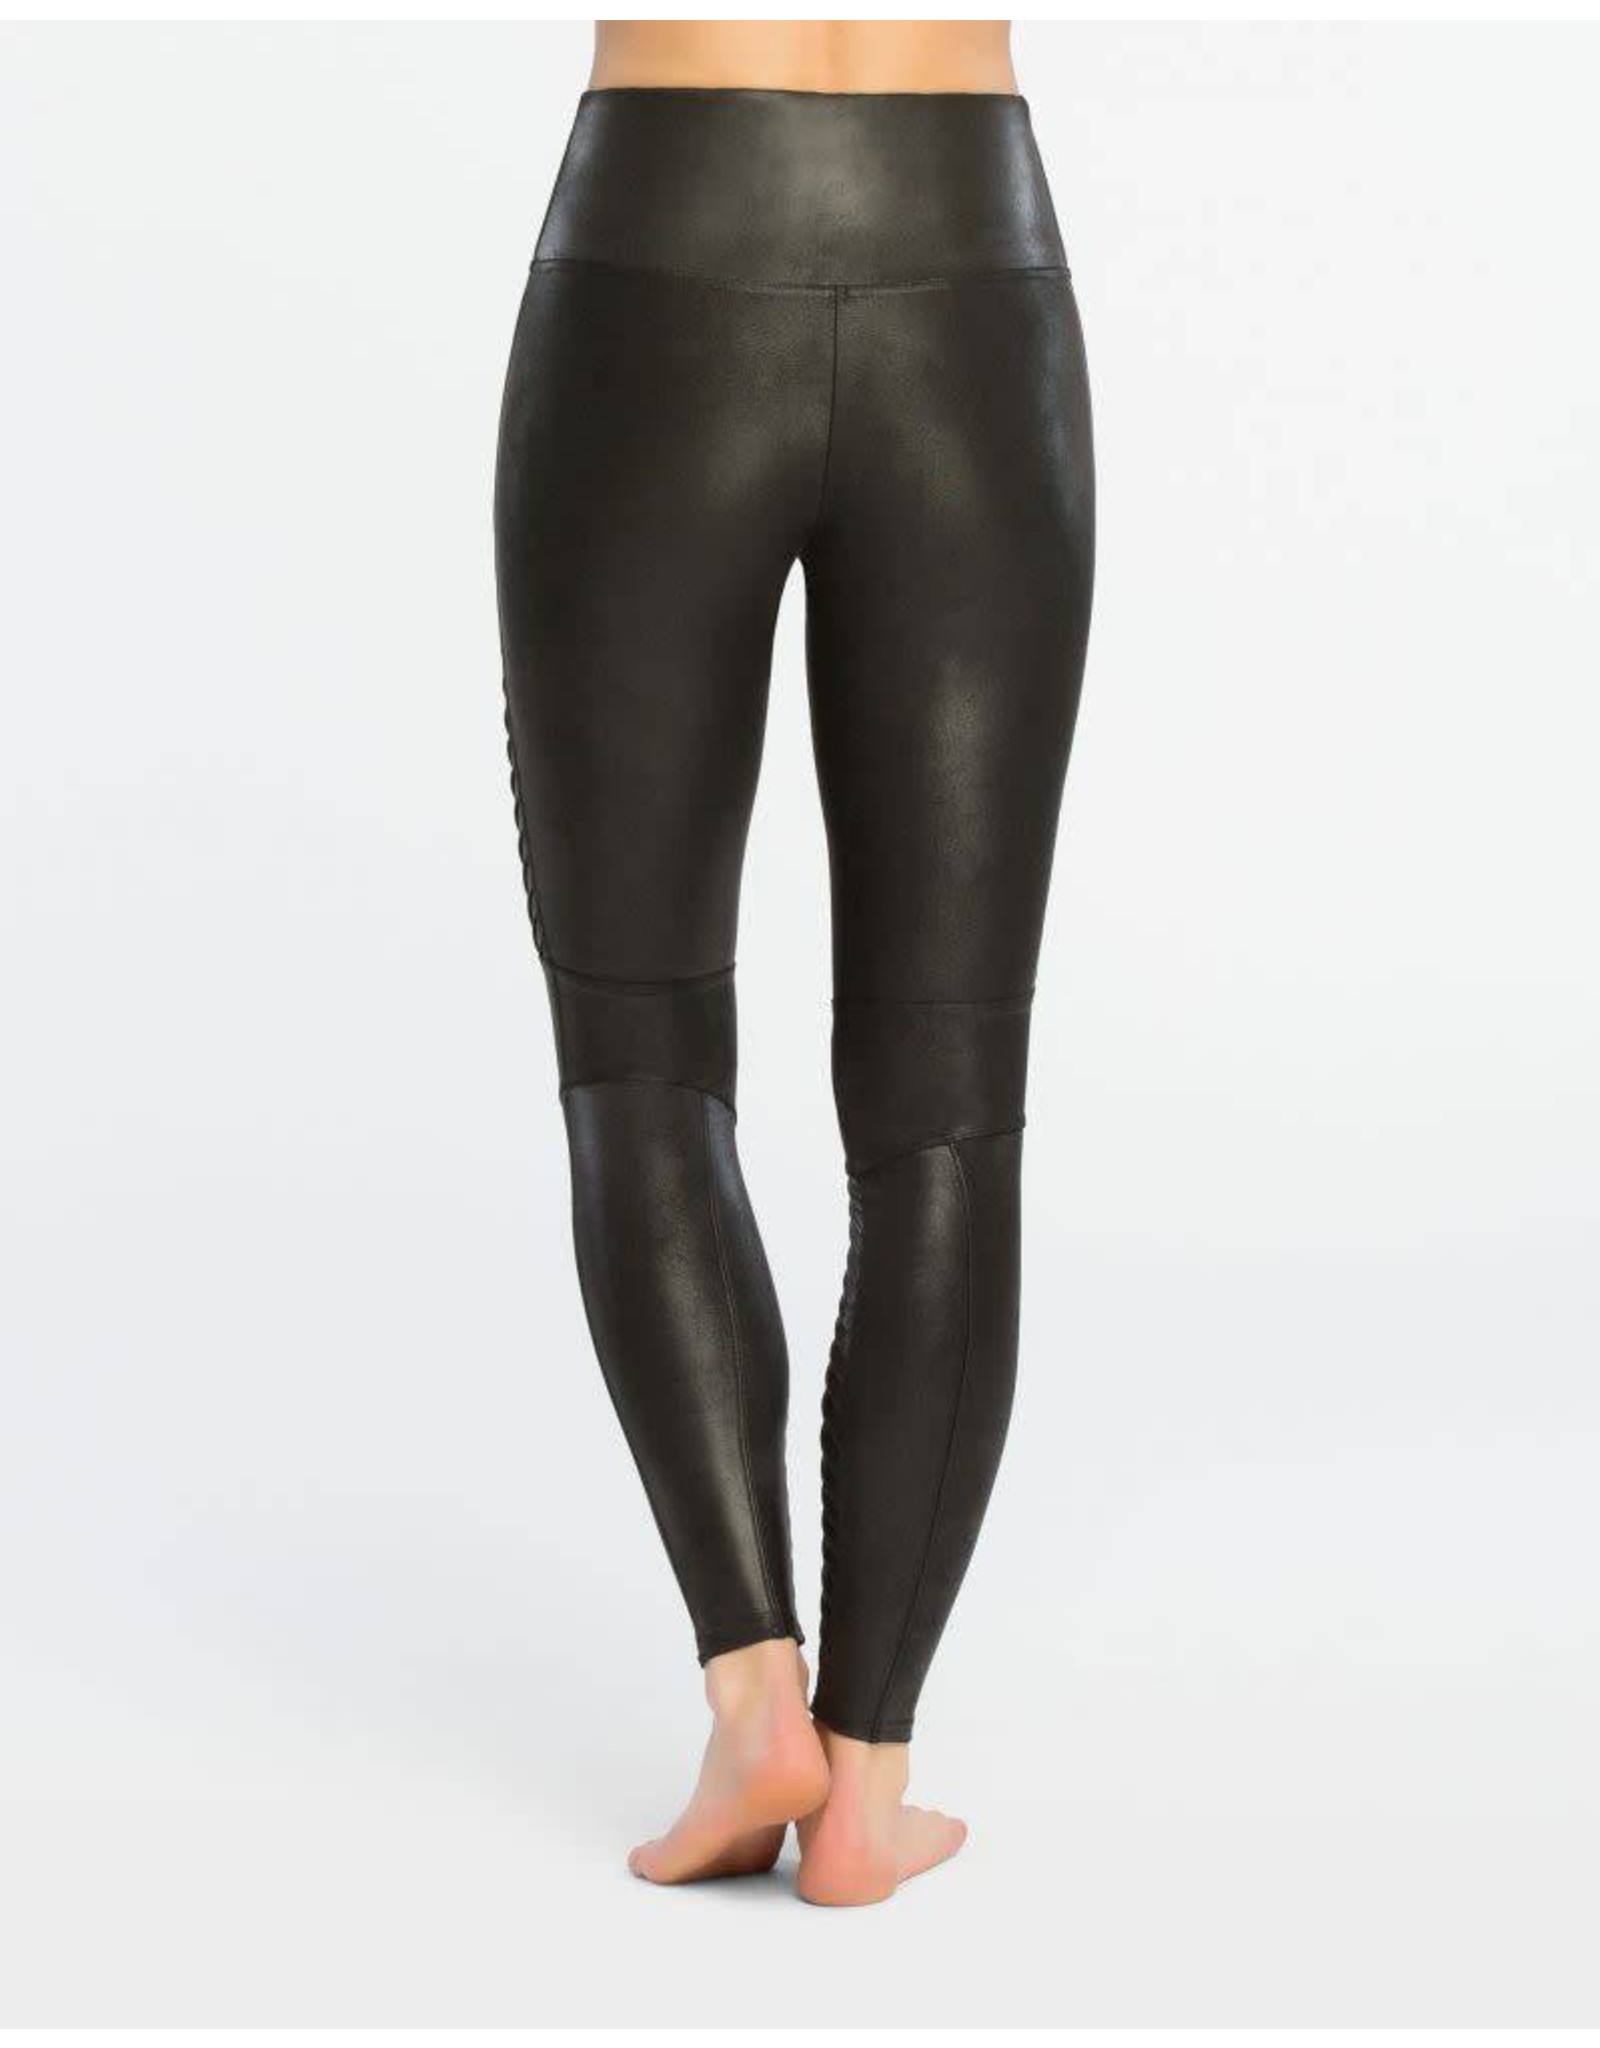 Spanx faux leather leggings review